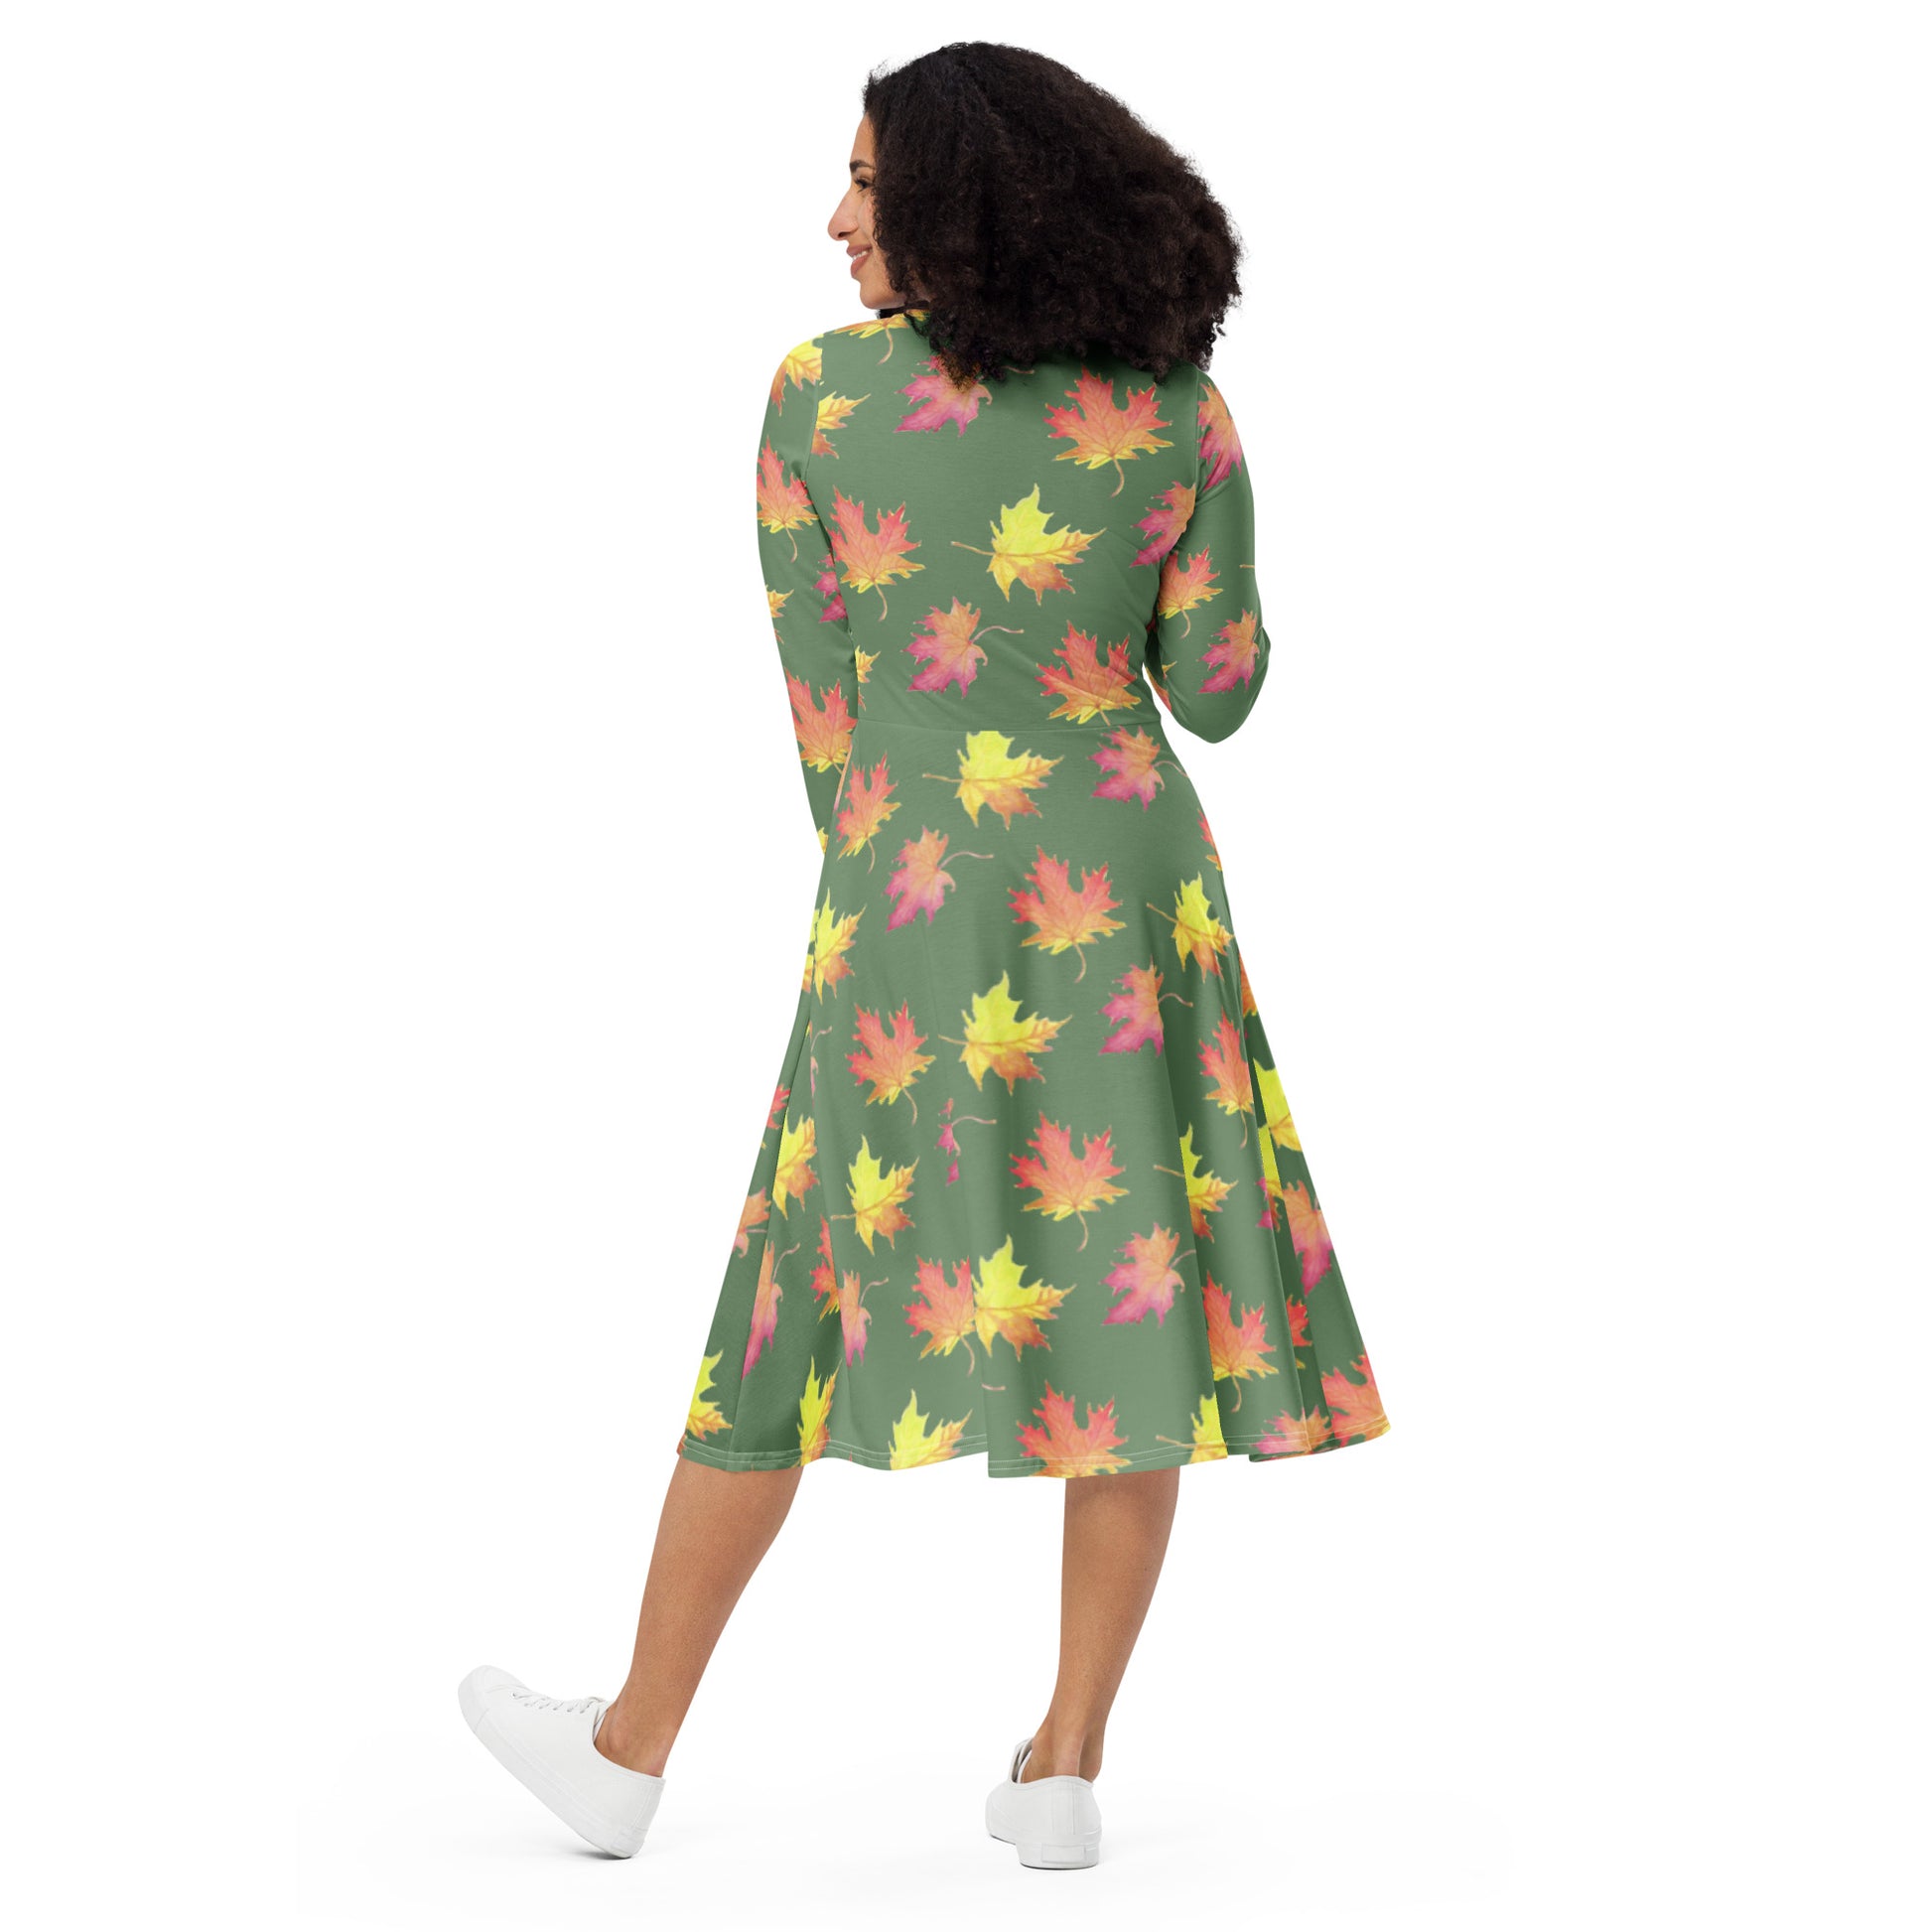 Long sleeve midi dress. Watercolor fall leaves patterned over an amulet green background. Soft and flattering fit. Boatline neck, fitted waist, flared bottom, and side pockets. Photo shows back view of dress on female model.